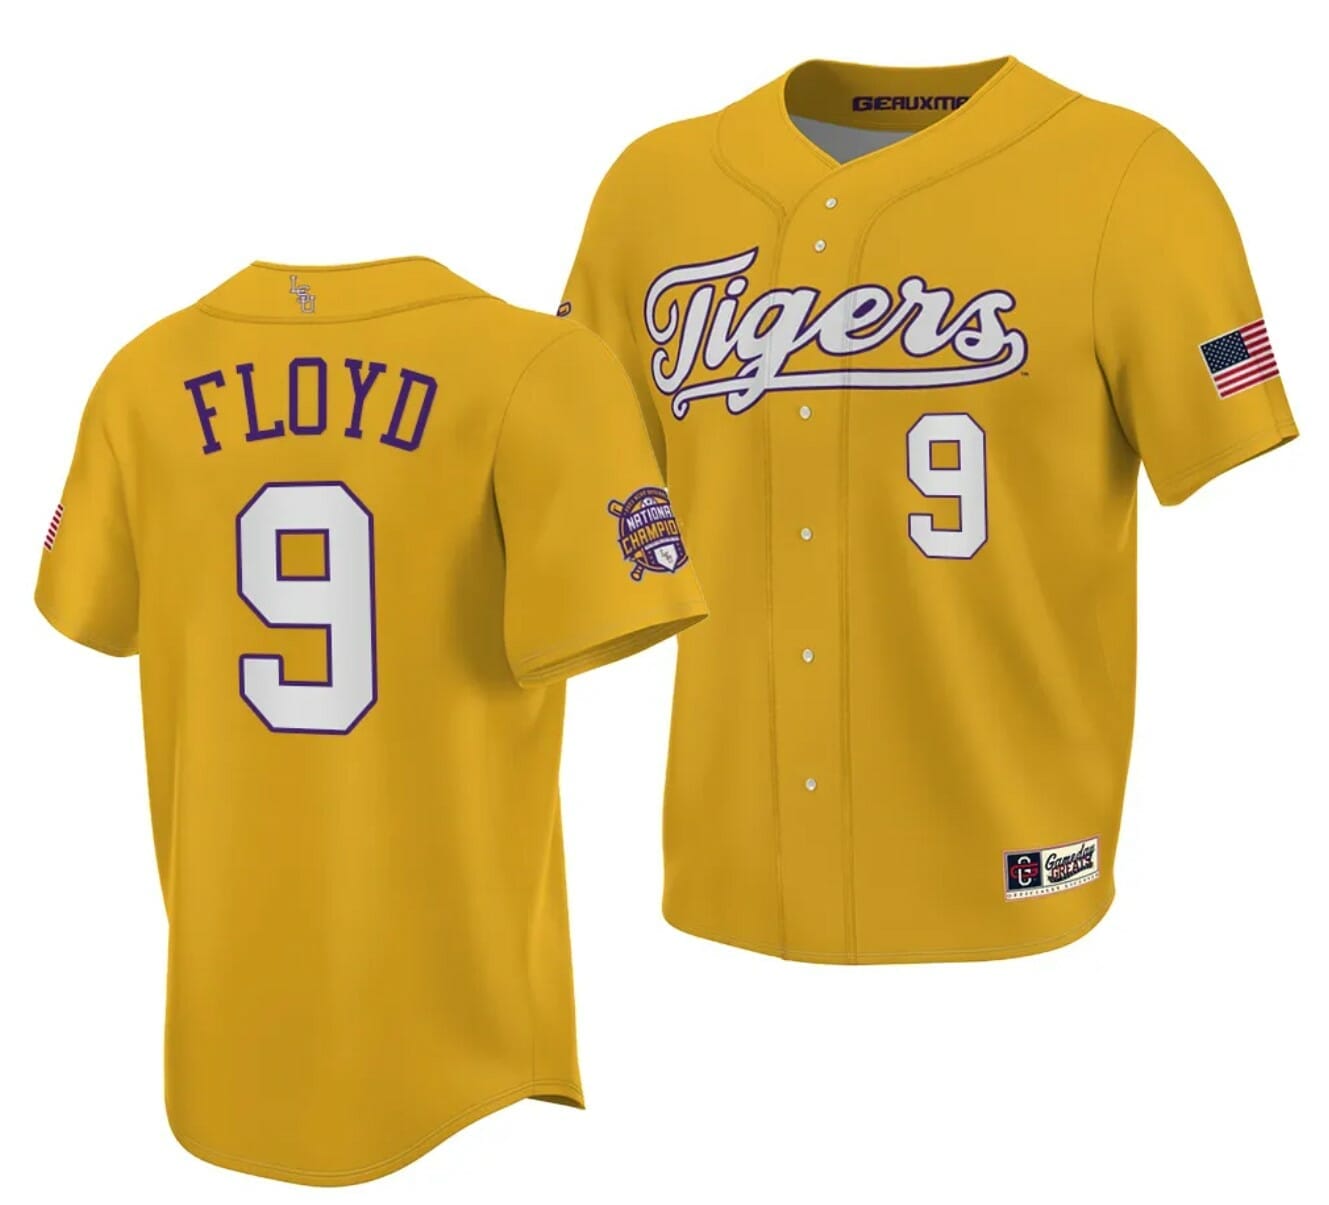 Hot] Buy New Ty Floyd Jersey LSU Tigers Gold Champions